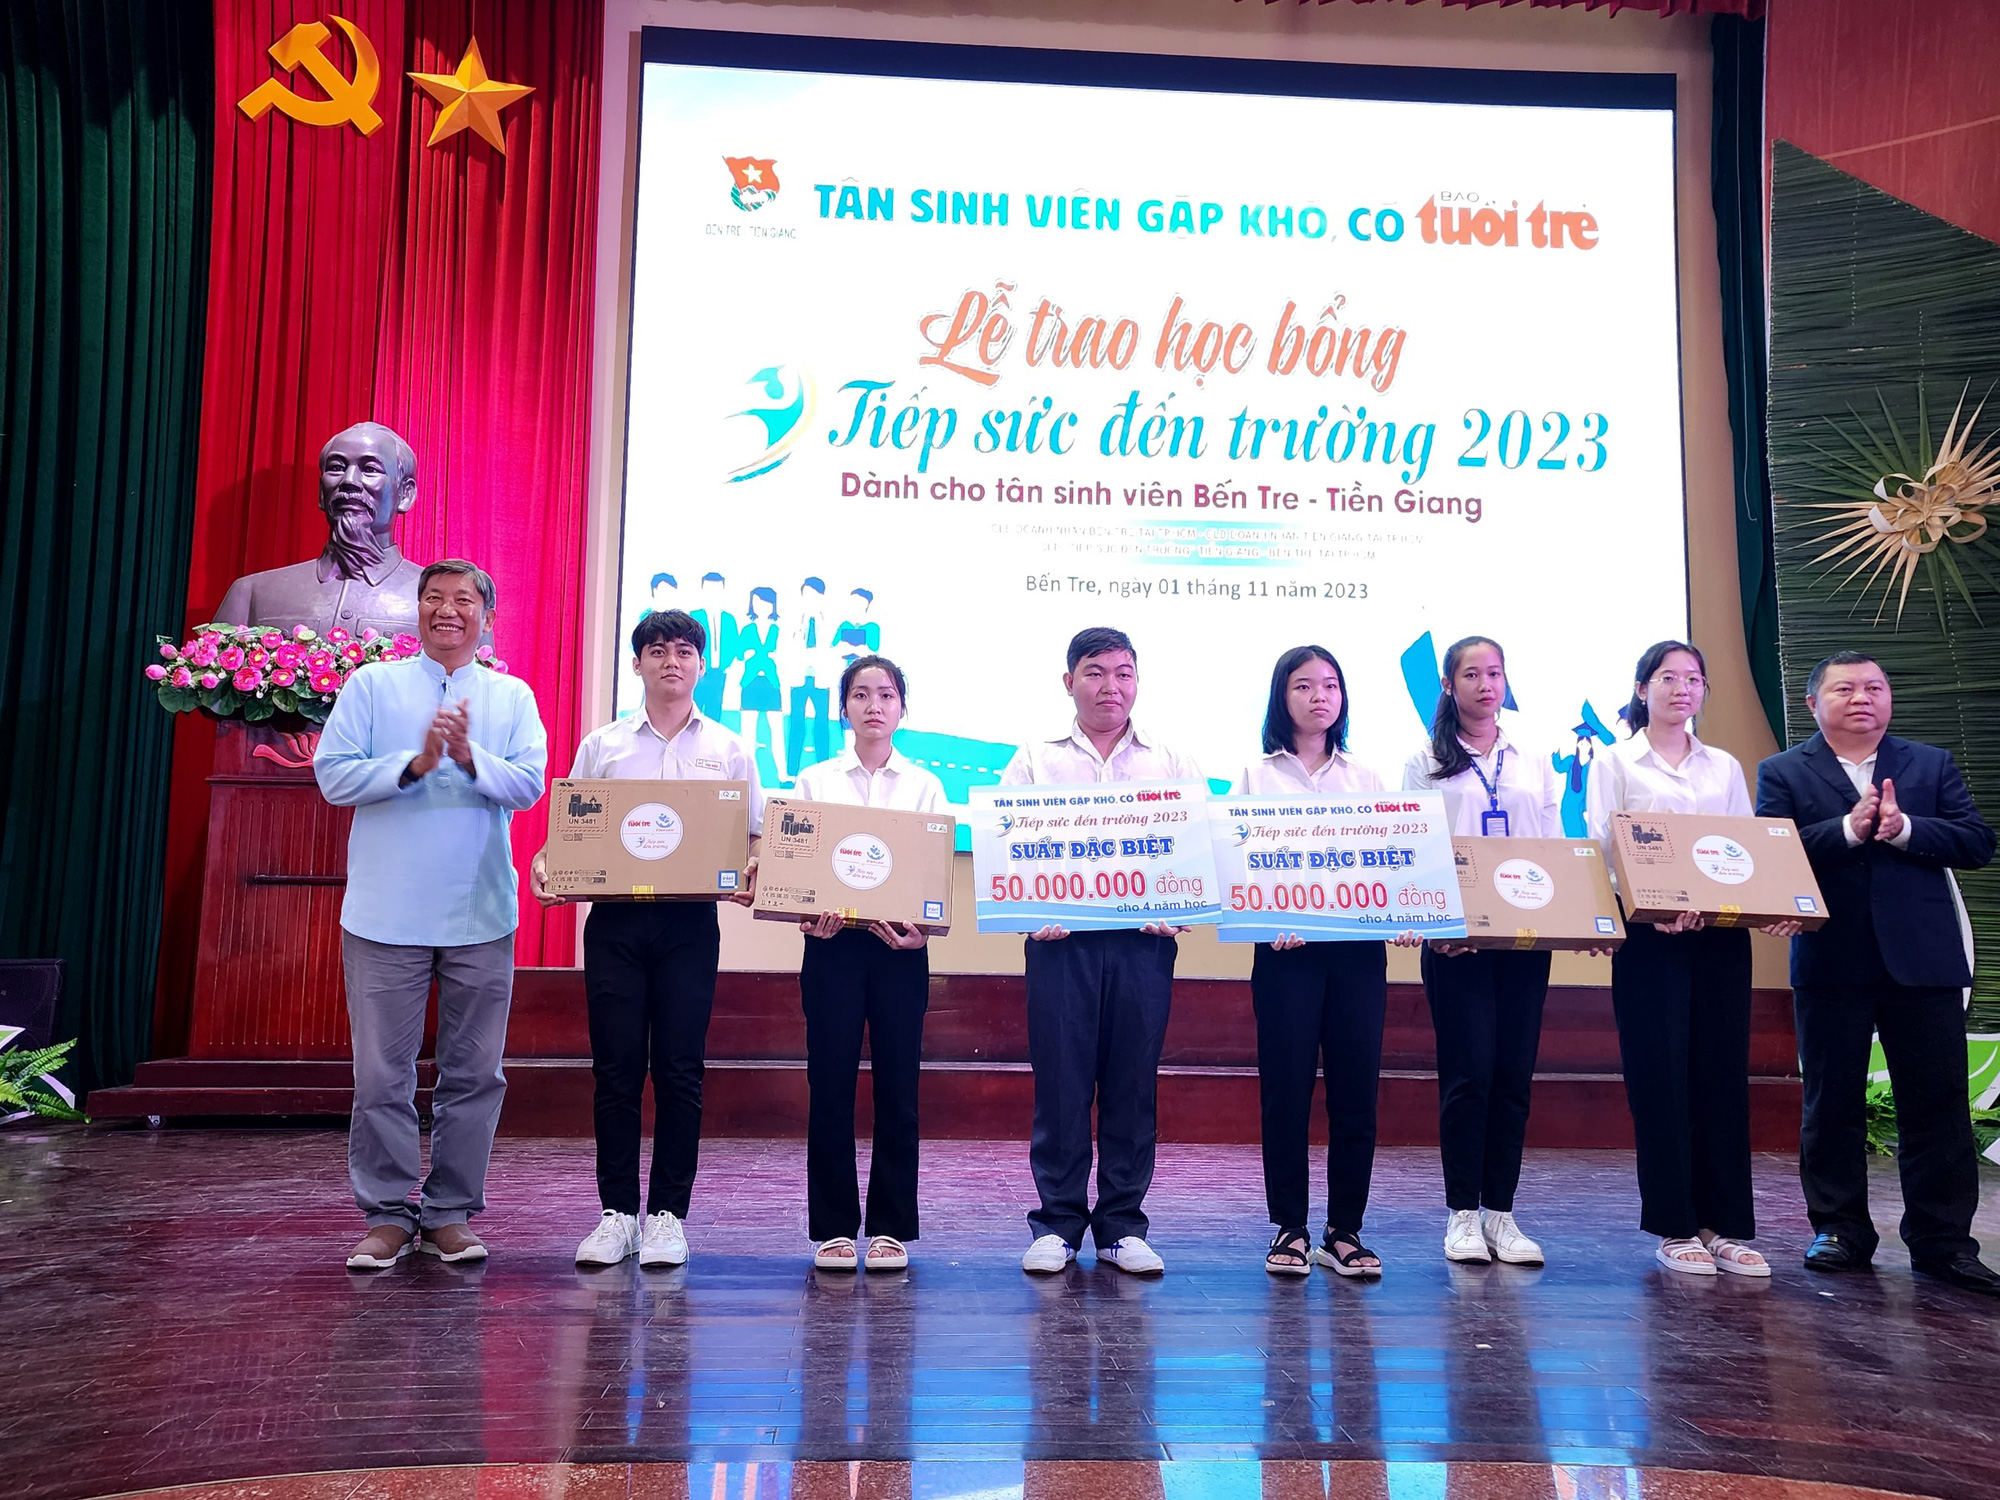 Ben Tre - During the Back to School Scholarship Award Ceremony on the morning of November 1 for 85 new students in Tien Giang, Nguyen Phuong Vi received a special scholarship of 50 million VND / full 4 years of study - Photo: Hoai Thuong